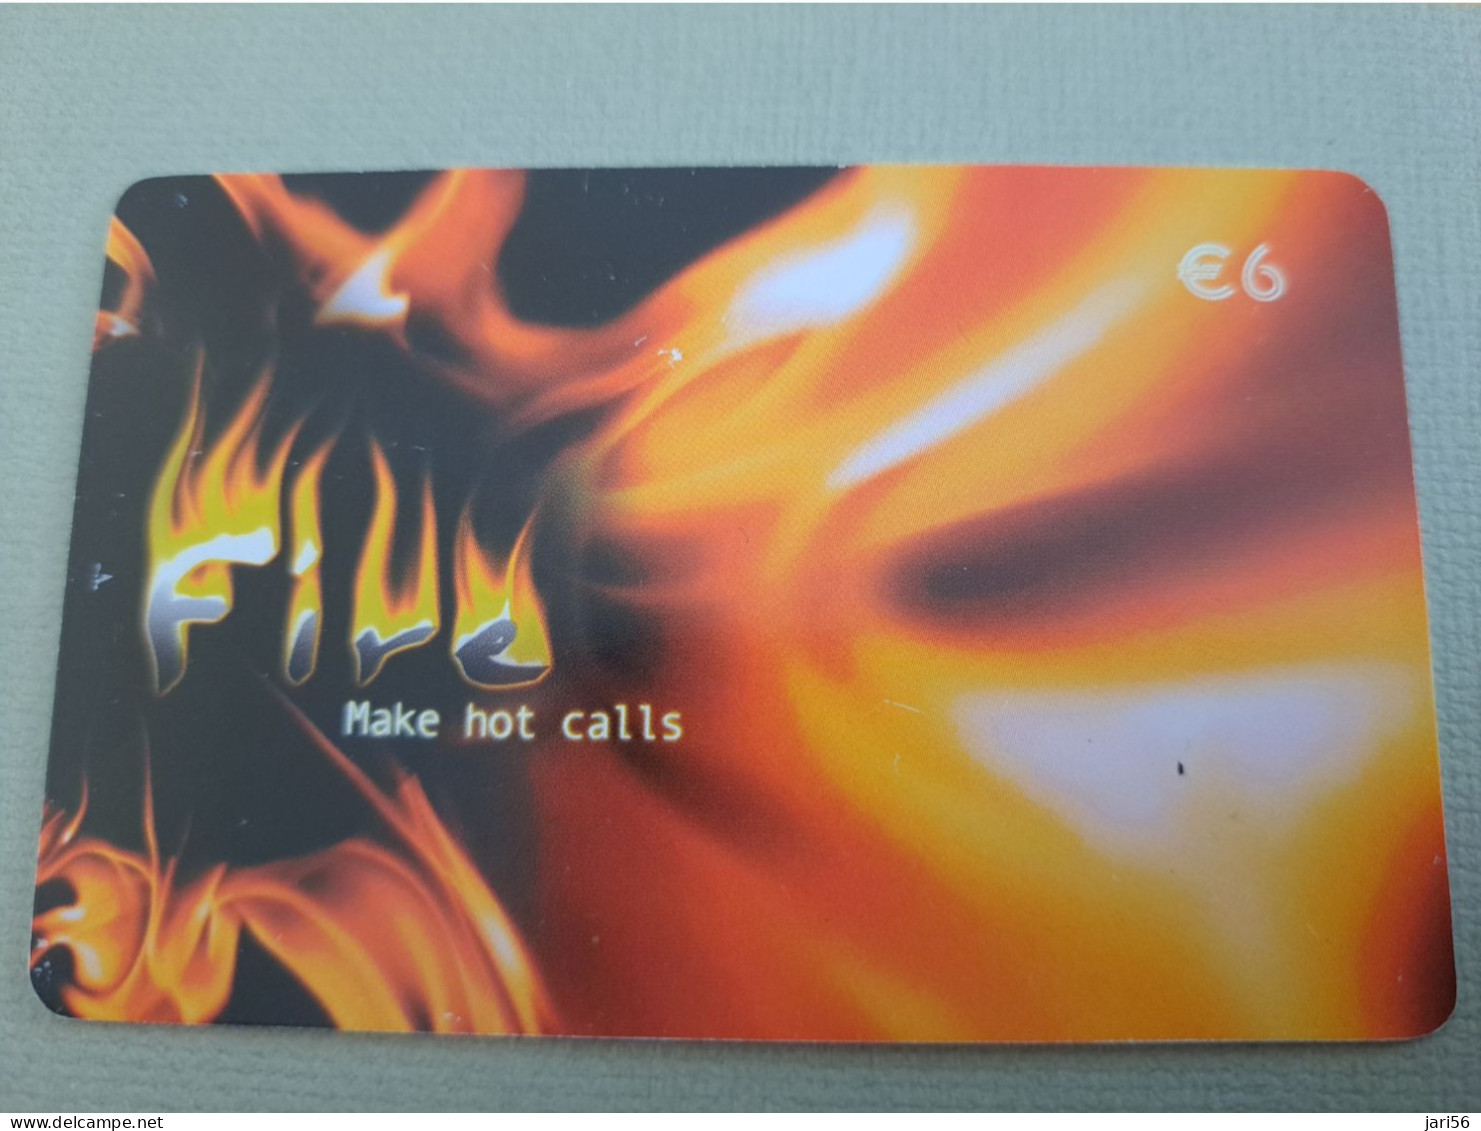 NETHERLANDS /  PREPAID / FIRE/ MAKE HOT CALLS  /  € 6,-  USED  ** 15254** - Privat